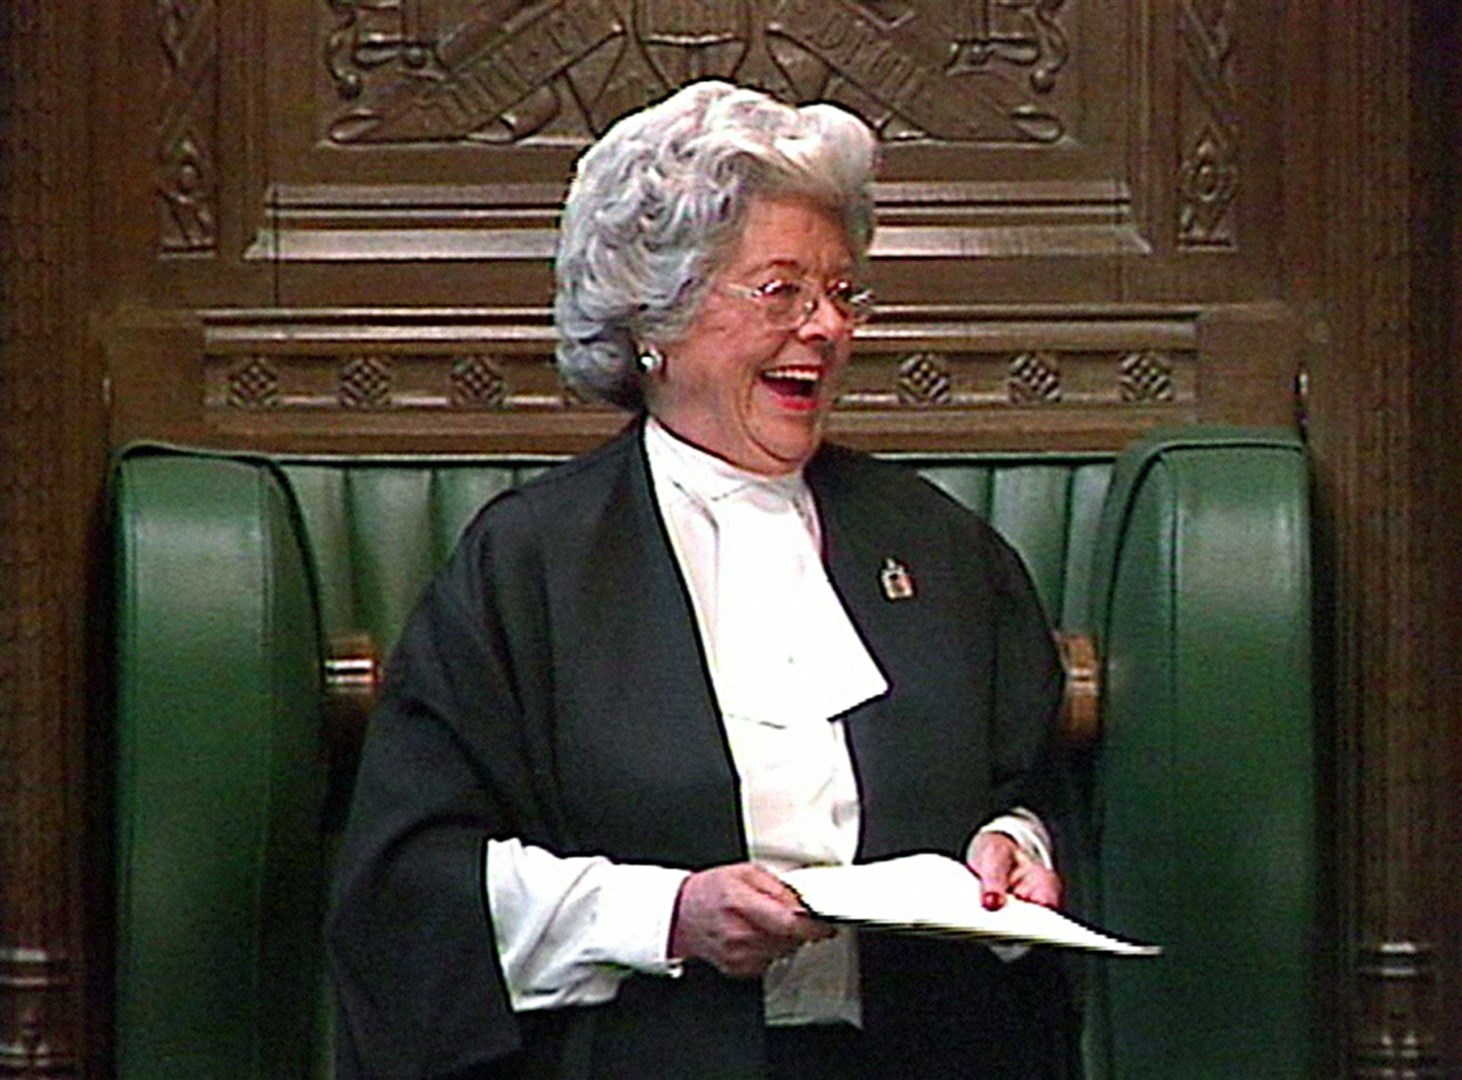 Betty Boothroyd, marking her retirement as speaker of the House of Commons, in 2000 (PA)